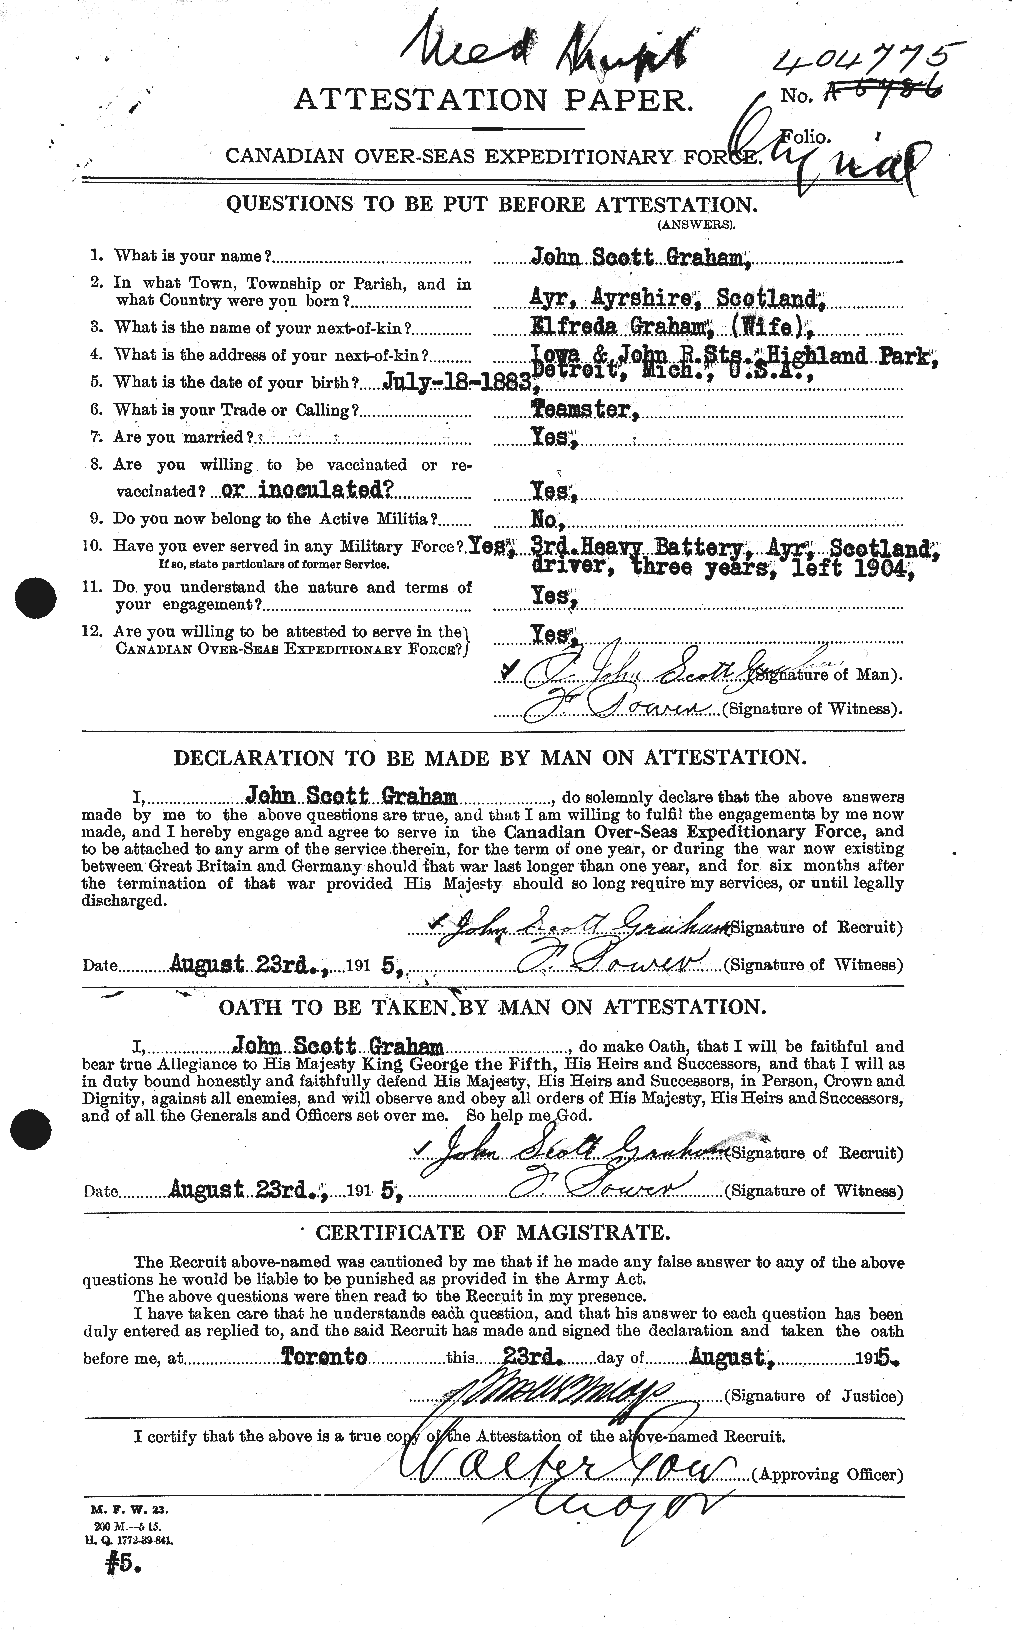 Personnel Records of the First World War - CEF 359208a